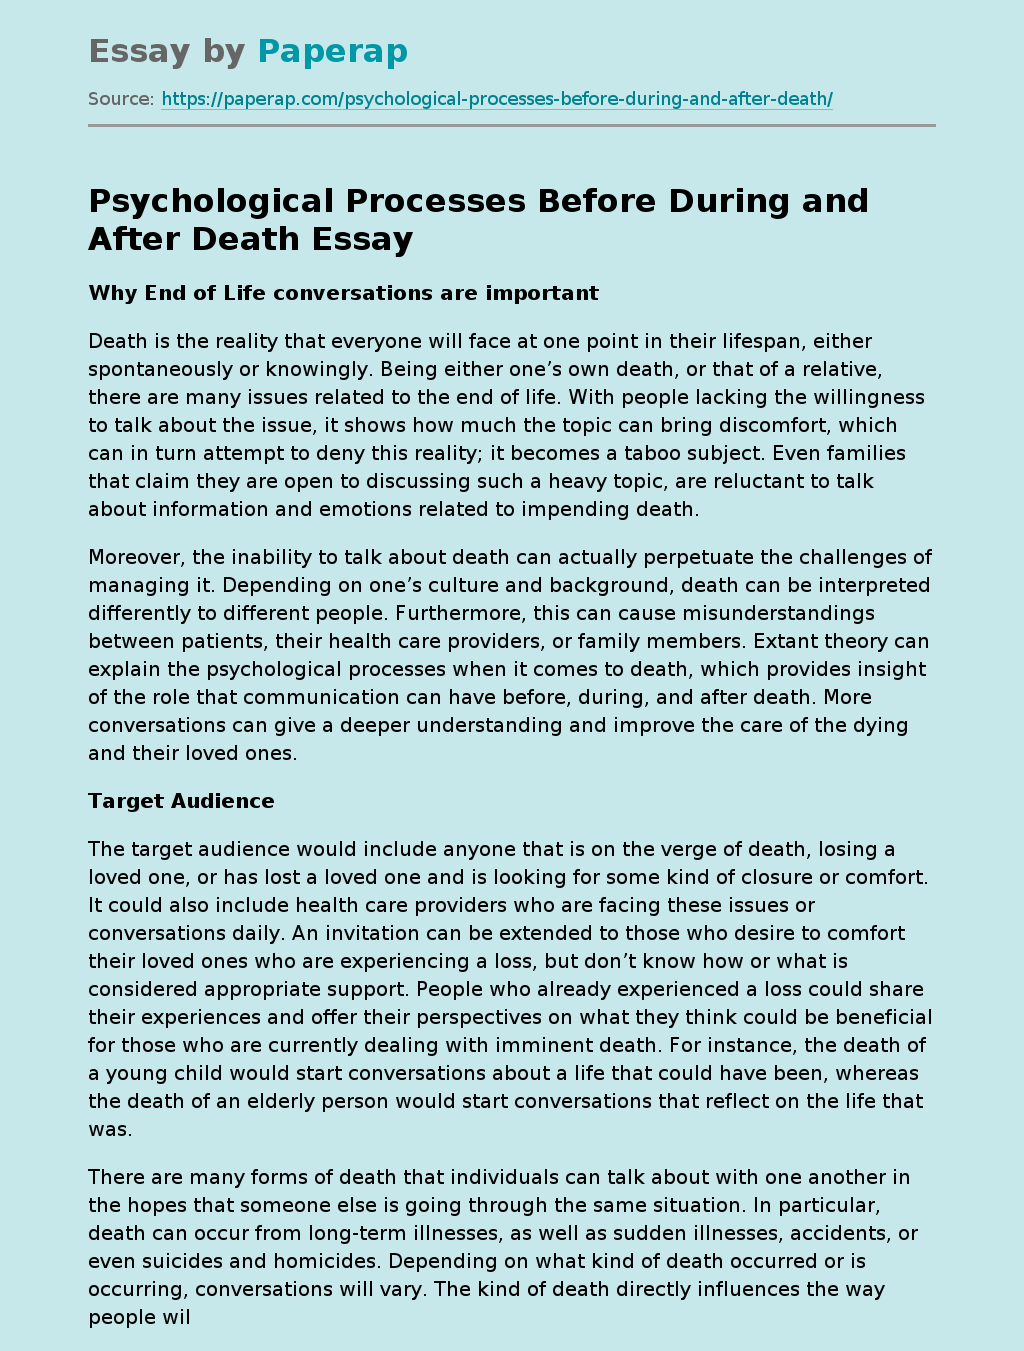 Psychological Processes Before During and After Death